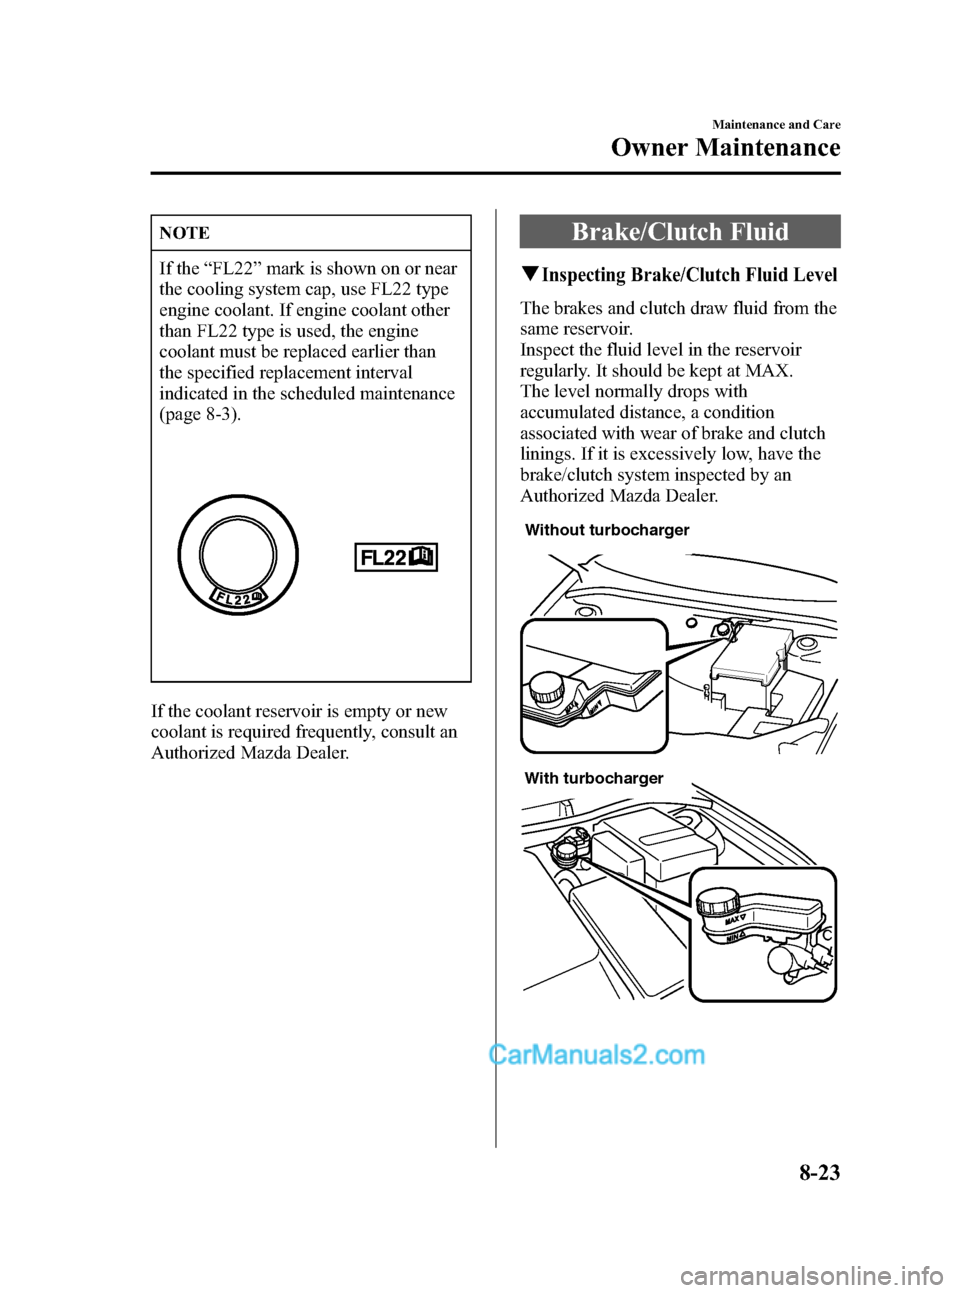 MAZDA MODEL MAZDASPEED 3 2007  Owners Manual (in English) Black plate (297,1)
NOTE
If the“FL22”mark is shown on or near
the cooling system cap, use FL22 type
engine coolant. If engine coolant other
than FL22 type is used, the engine
coolant must be repla